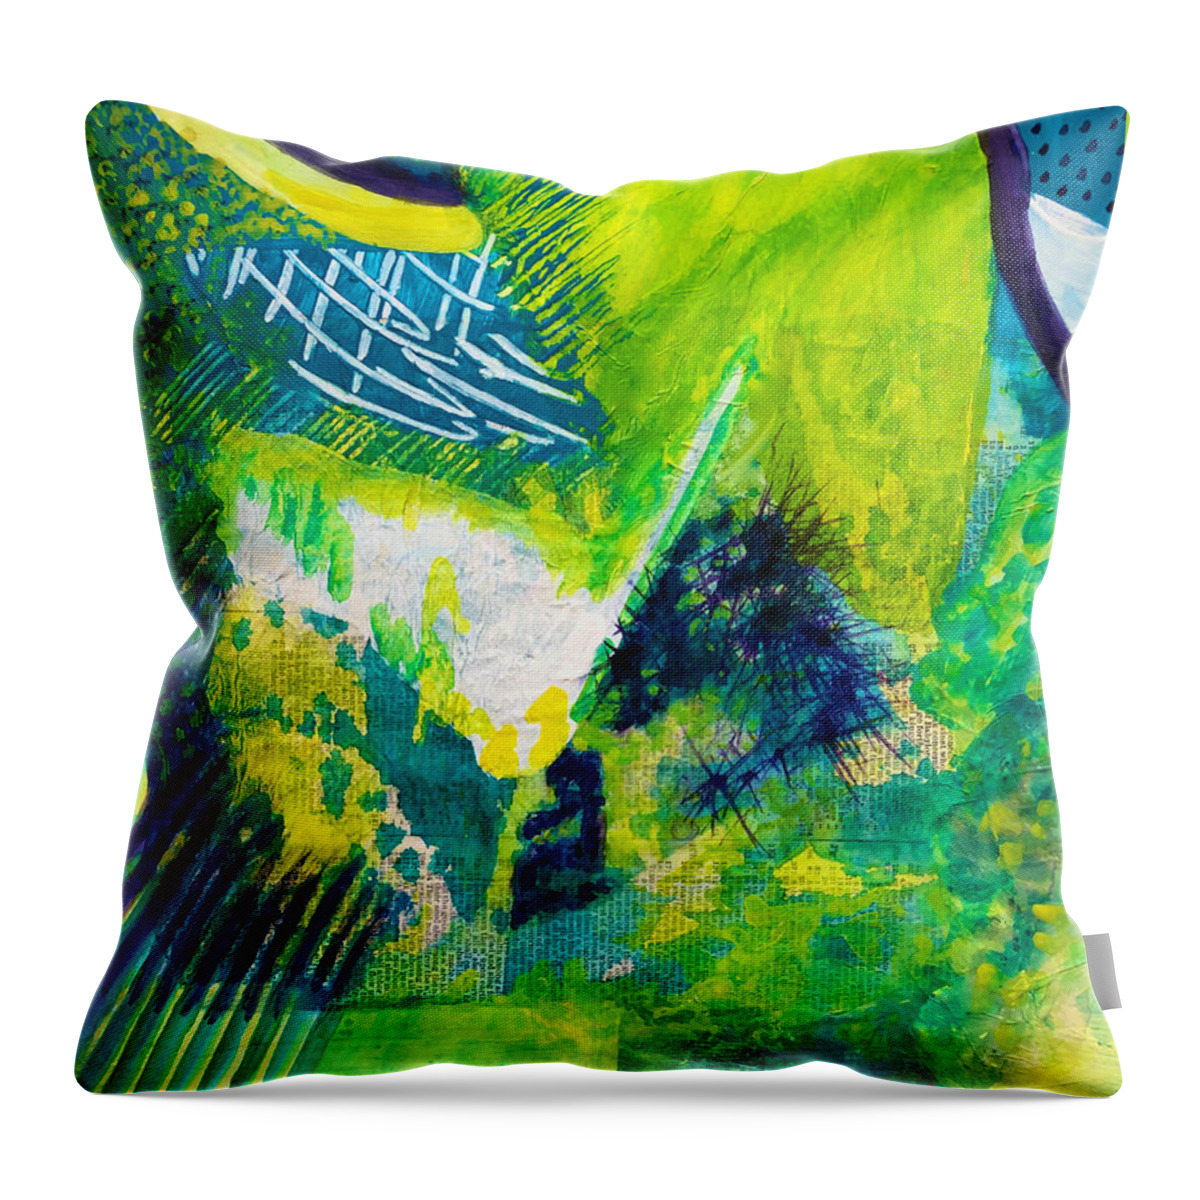  Throw Pillow featuring the painting Willing to Grow by Polly Castor